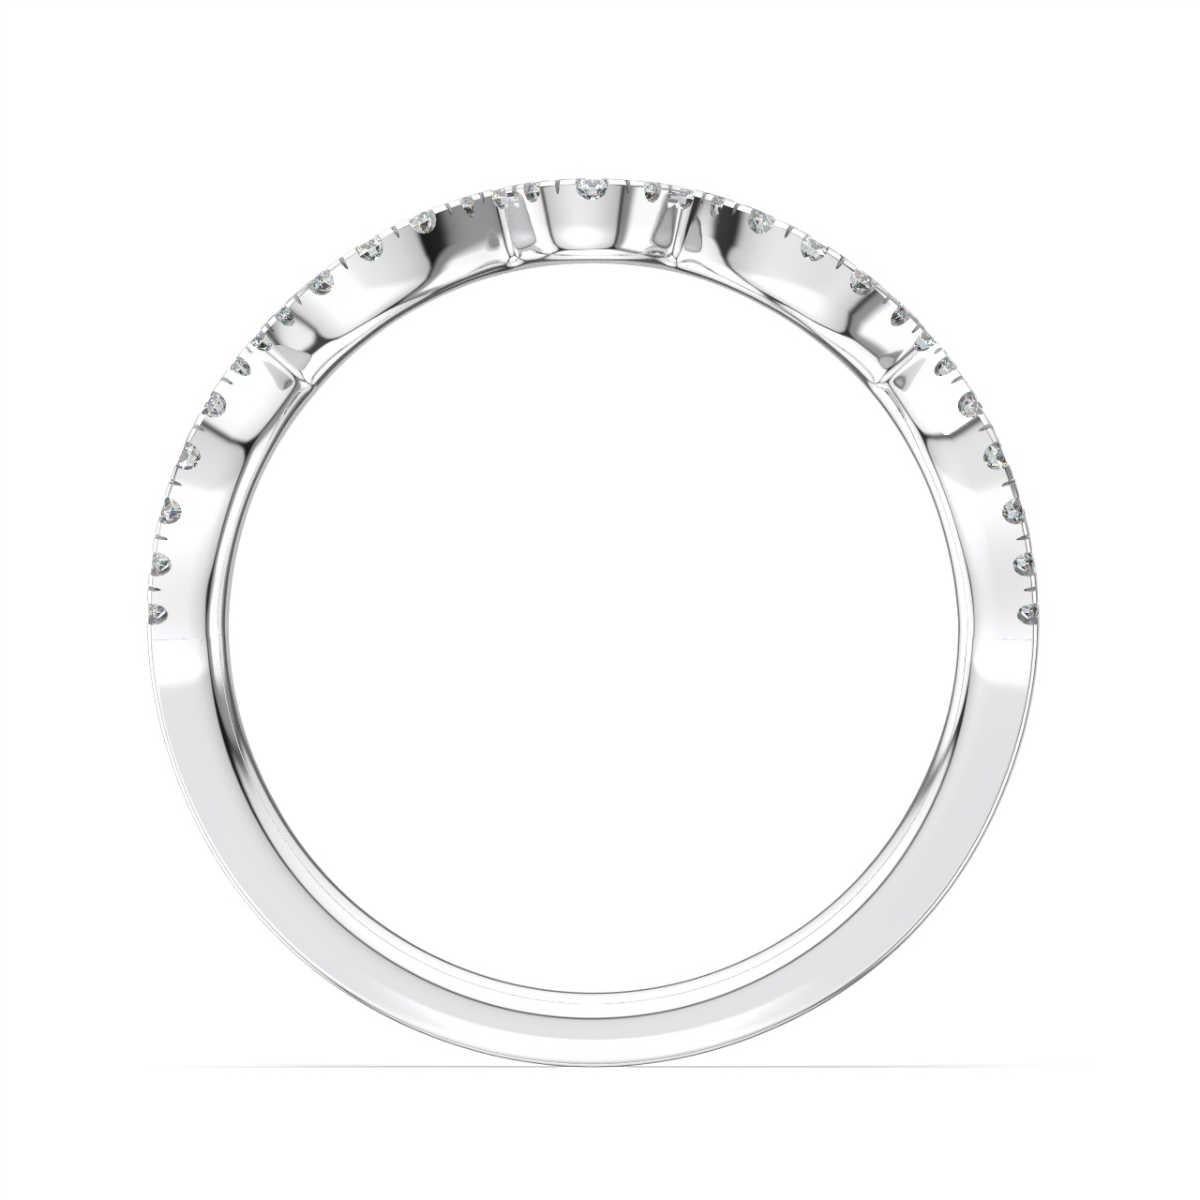 This petite band features a perfectly matched round brilliant diamonds micro prong set. Experience the difference!

Product details: 

Center Gemstone Color: WHITE
Side Gemstone Type: NATURAL DIAMOND
Side Gemstone Shape: ROUND
Metal: Platinum
Metal